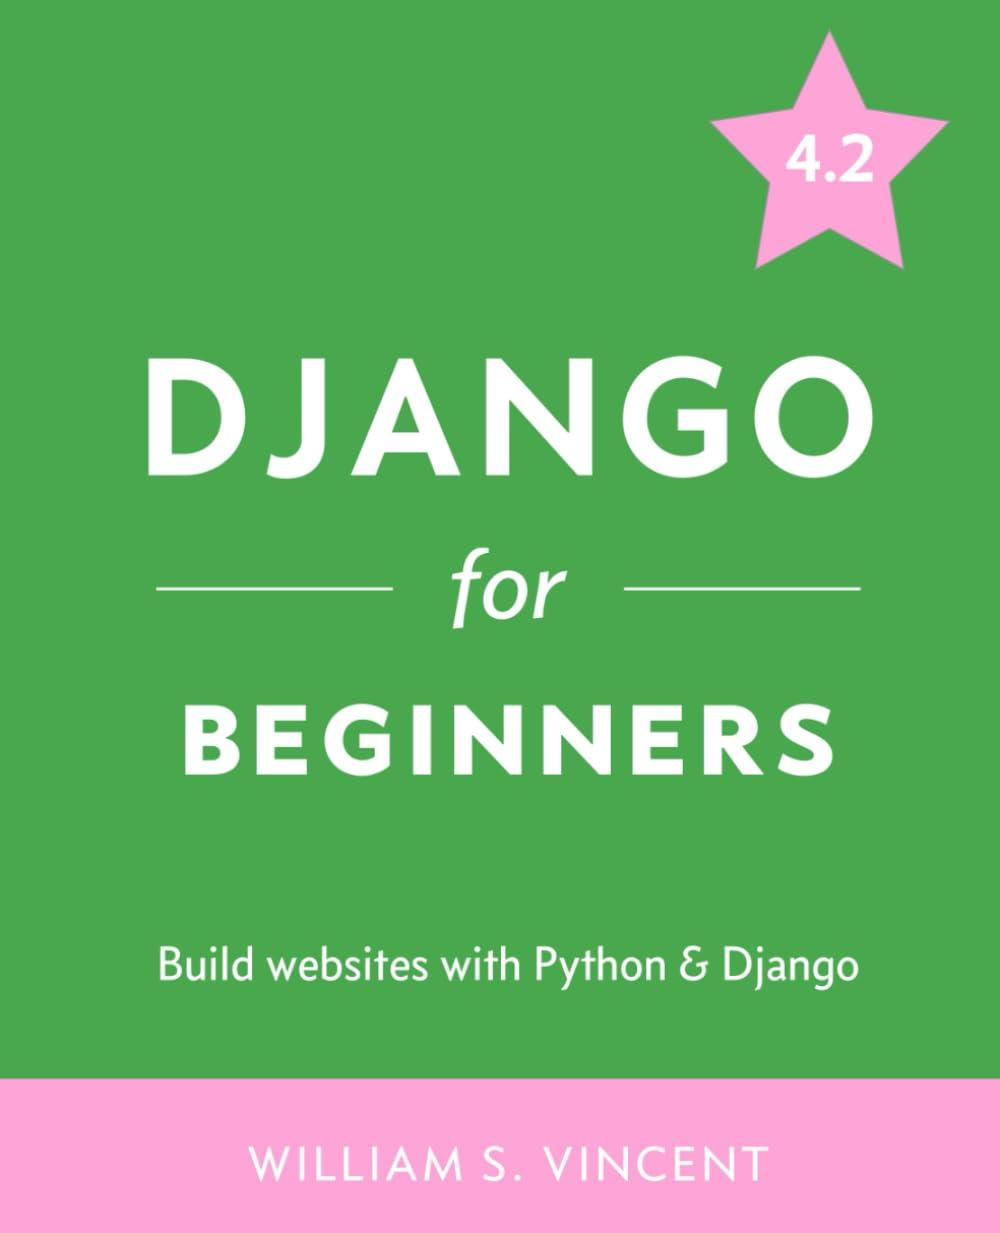 django for beginners build websites with python and django 1st edition william s. vincent 1735467243,